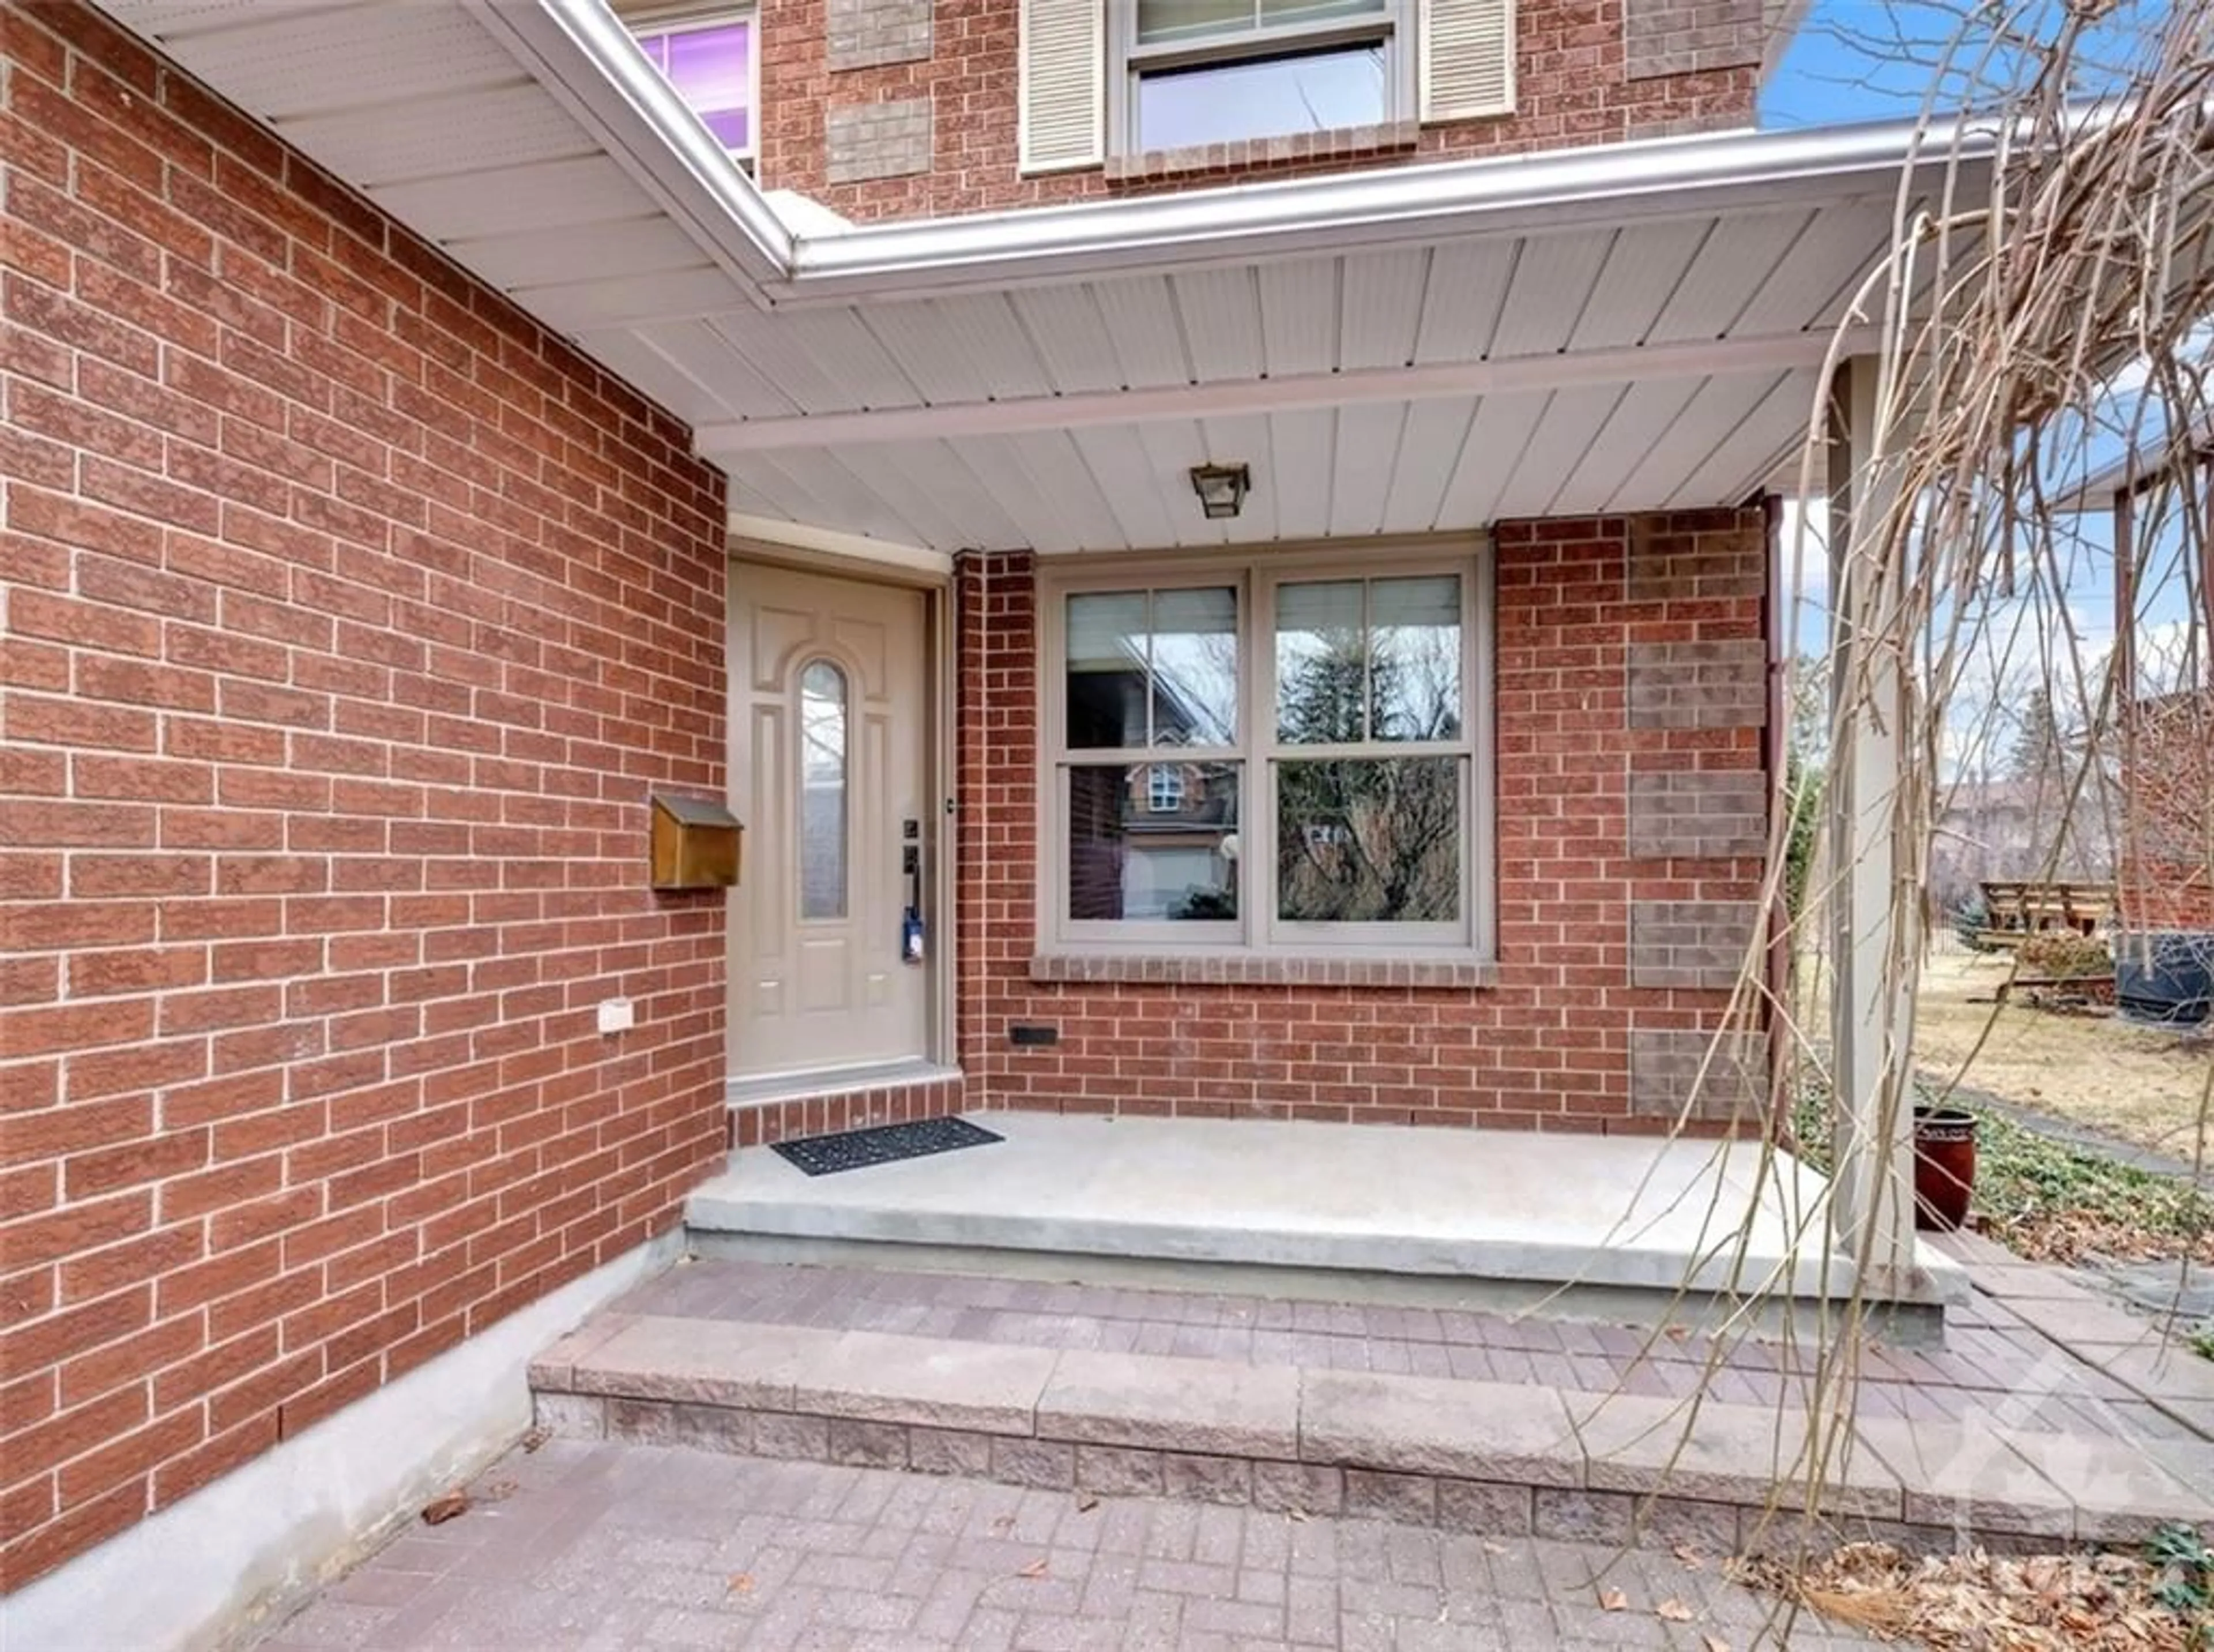 Home with brick exterior material for 222 WALDEN Dr, Ottawa Ontario K2K 2K6